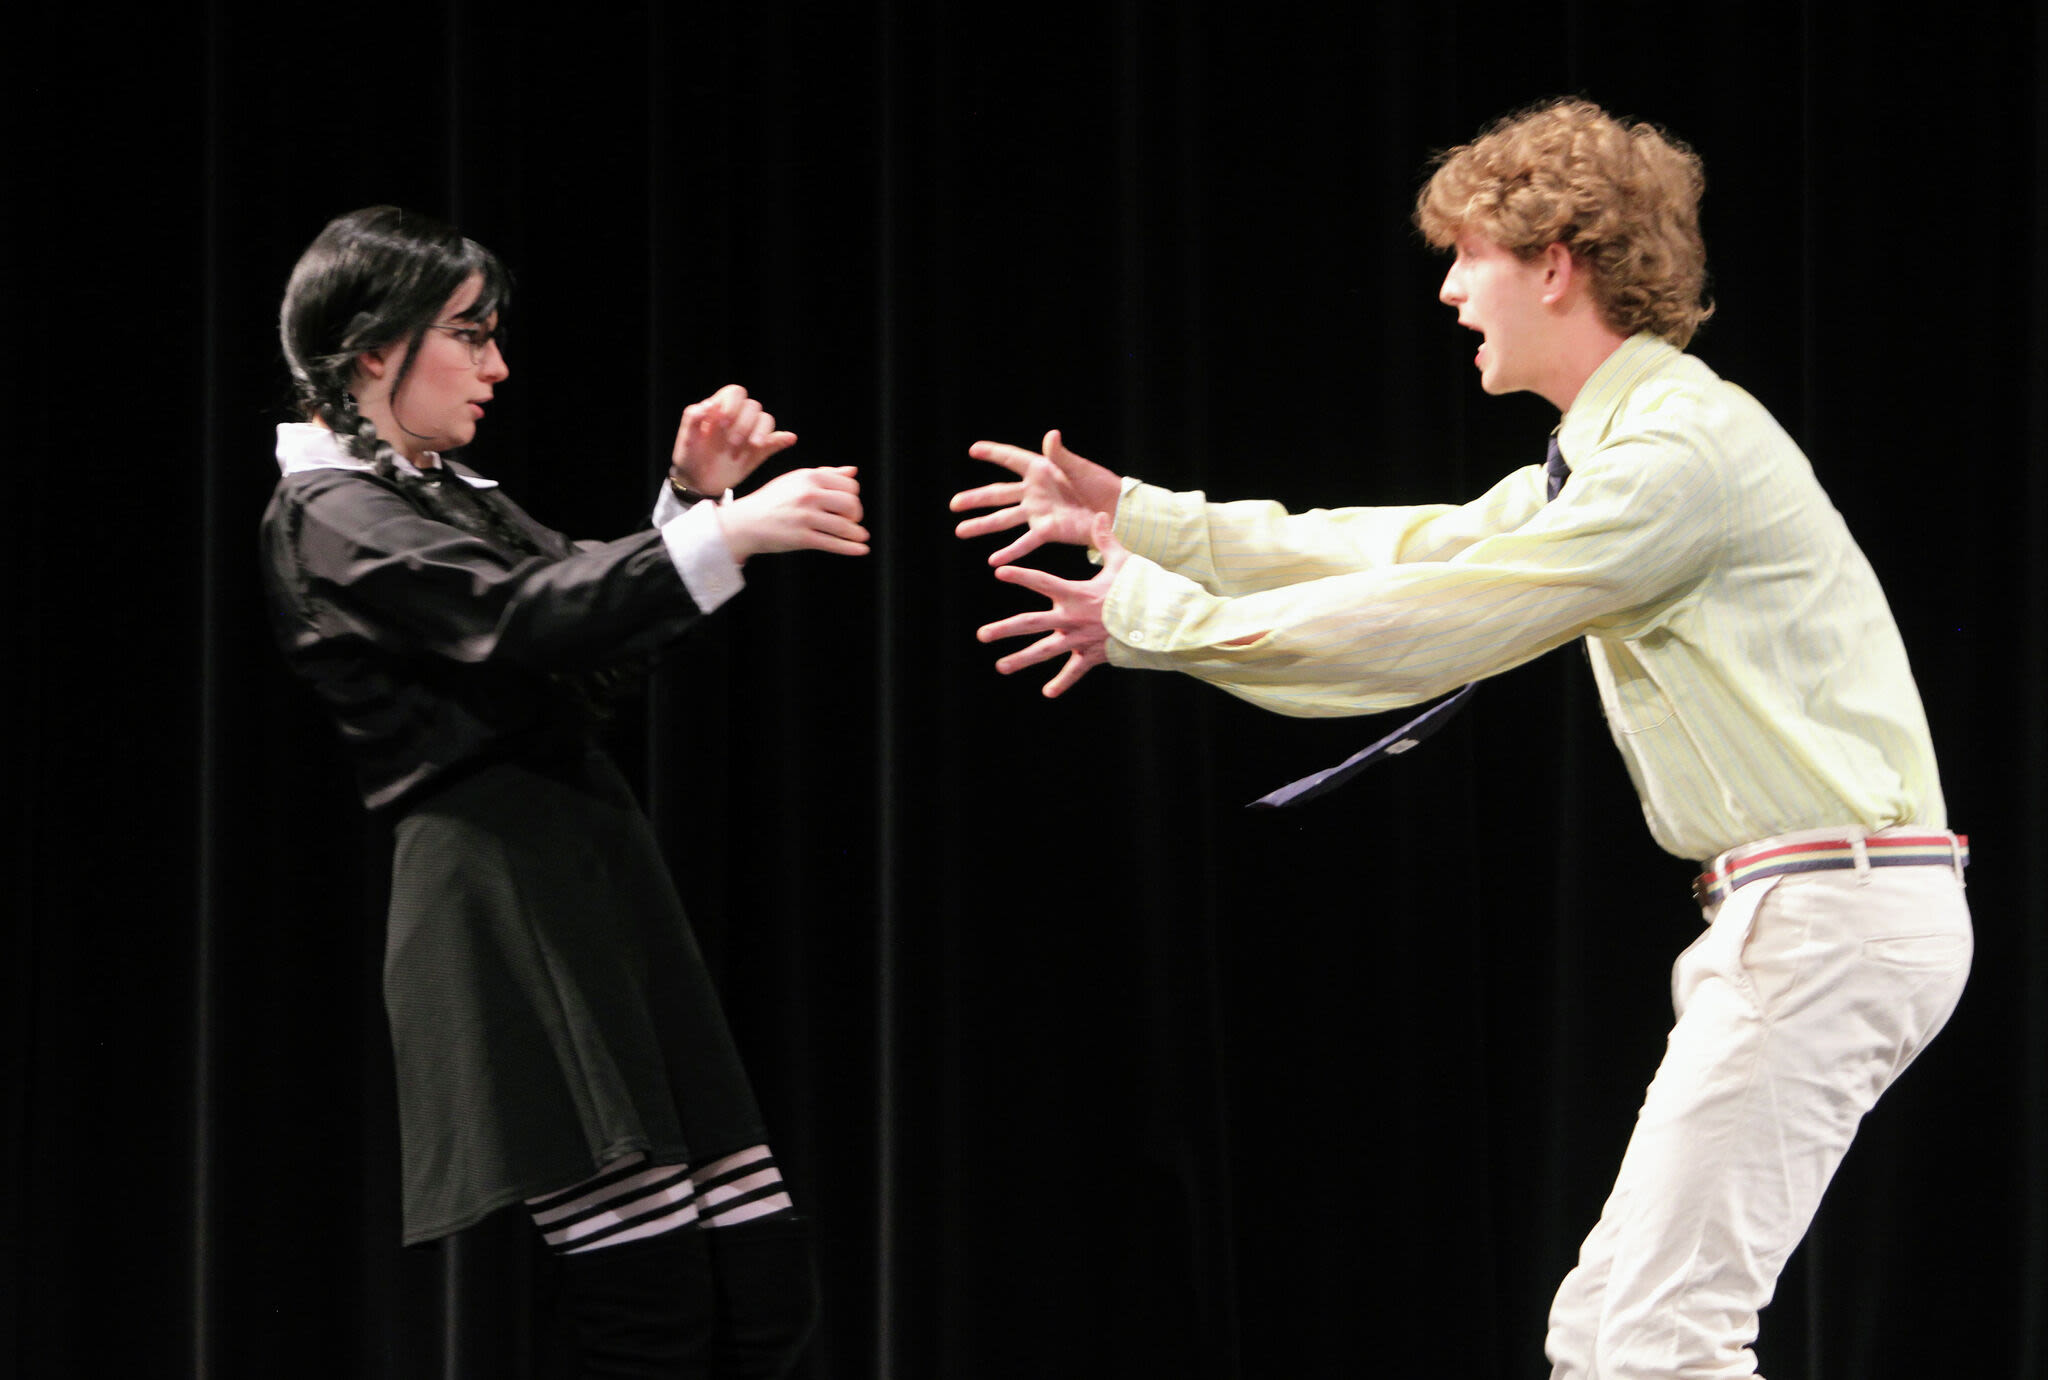 Wilton High School goes creepy and kooky with musical production of 'The Addams Family'